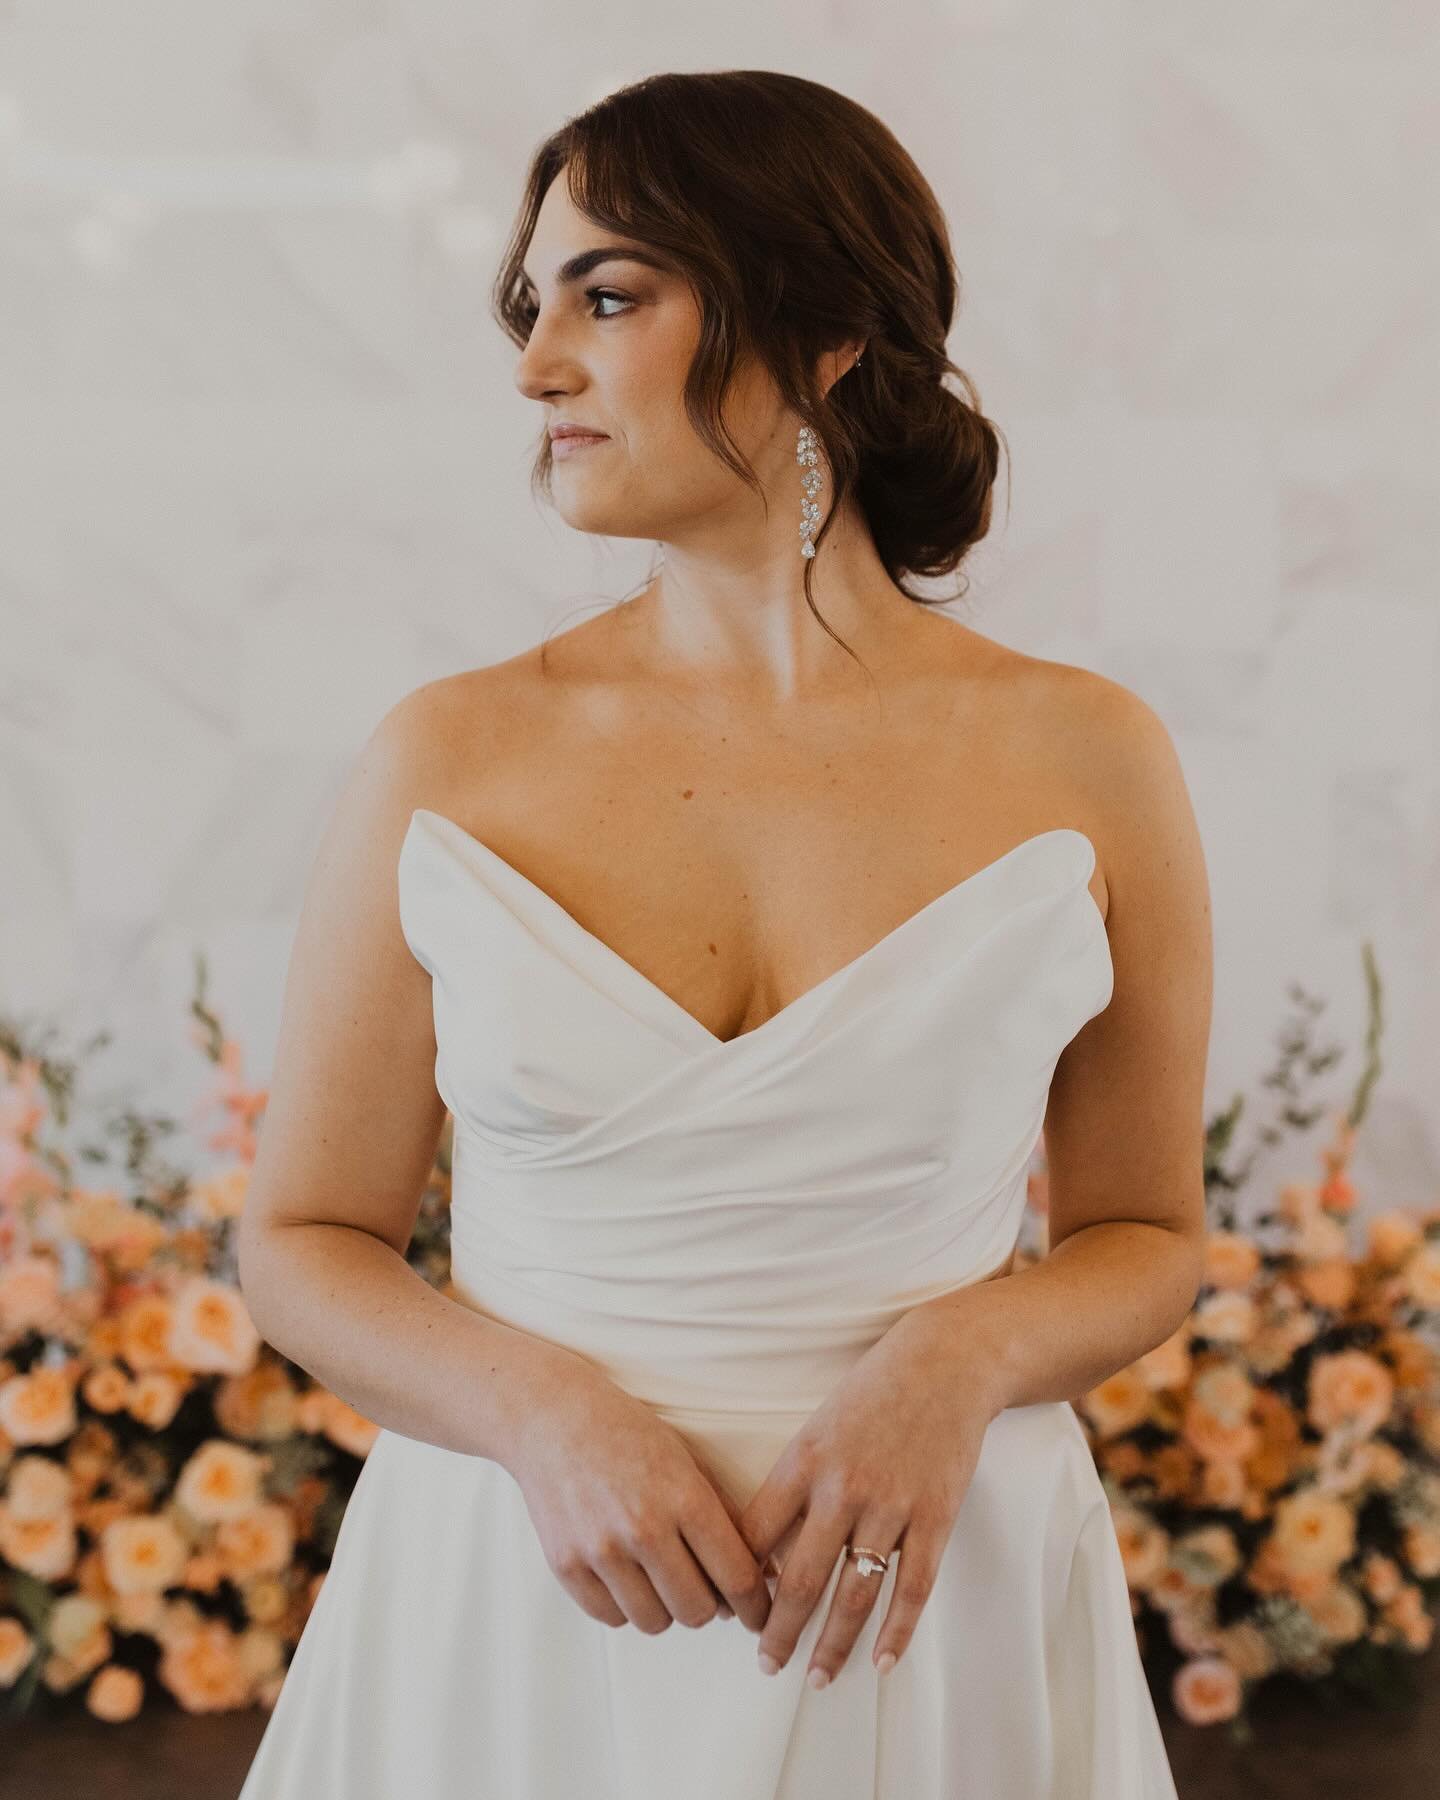 ⚠️ SAMPLE GOWNS aka gowns available directly off the showroom floor for a discounted price point + go home with you the same day as your appt. 

While we specialize in special orders, we have a variety of beautiful gowns available off the rack at all